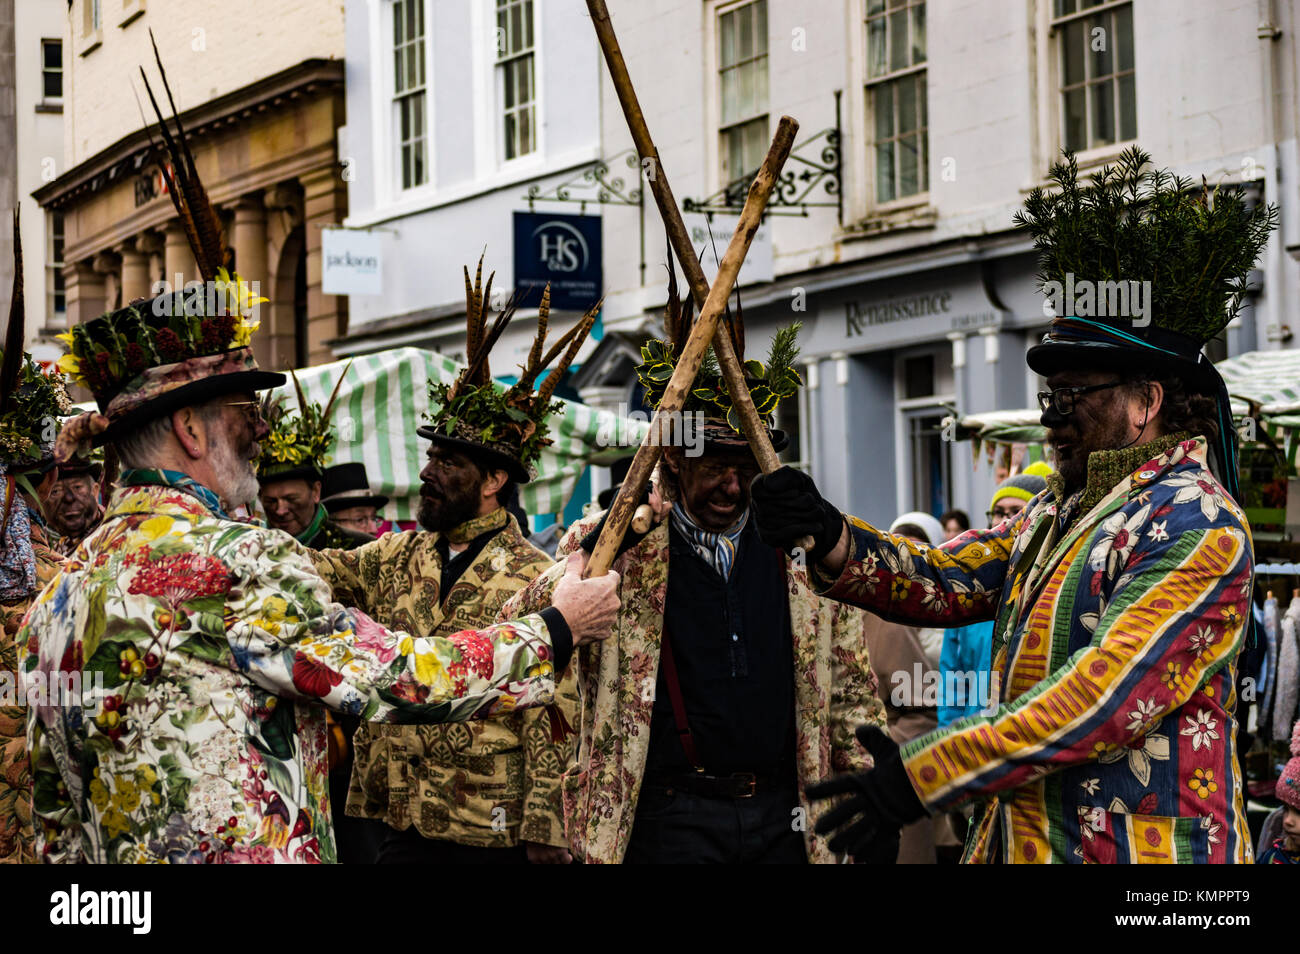 Leominster, UK. 9th December, 2017. Leominster Morris perform a traditional Morris dance in the streets of Leominster during the towns Victorian Christmas Market in Leominster on December 9th 2017. Credit: Jim Wood/Alamy Live News Stock Photo